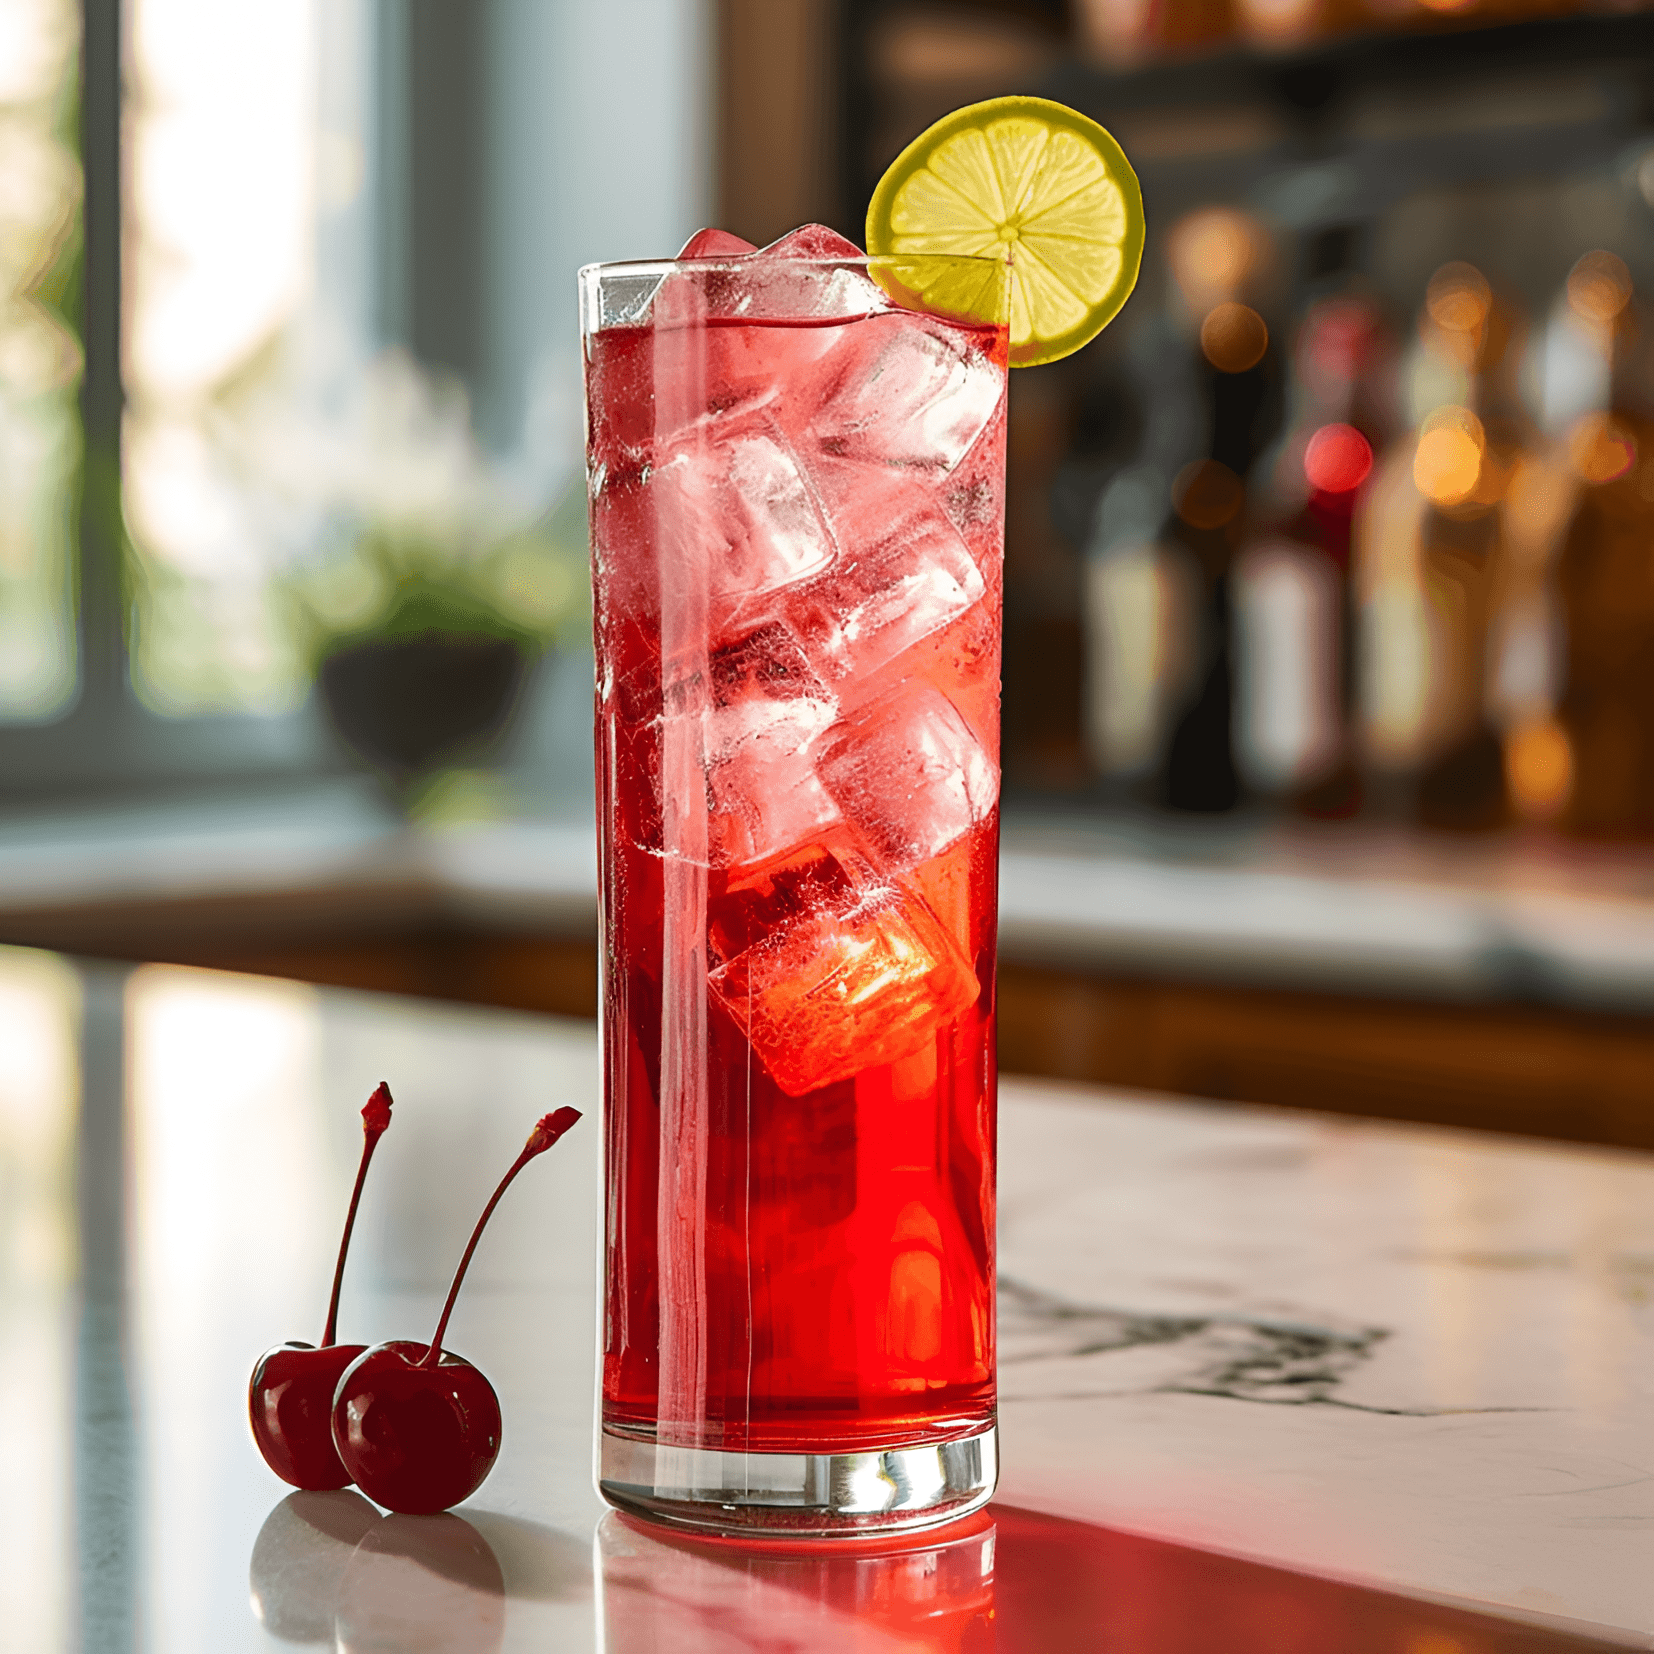 Shirley Temple Cocktail Recipe - The Shirley Temple cocktail is sweet, refreshing, and slightly tangy. The combination of ginger ale, grenadine, and lemon-lime soda creates a delightful balance of flavors that is both satisfying and thirst-quenching.